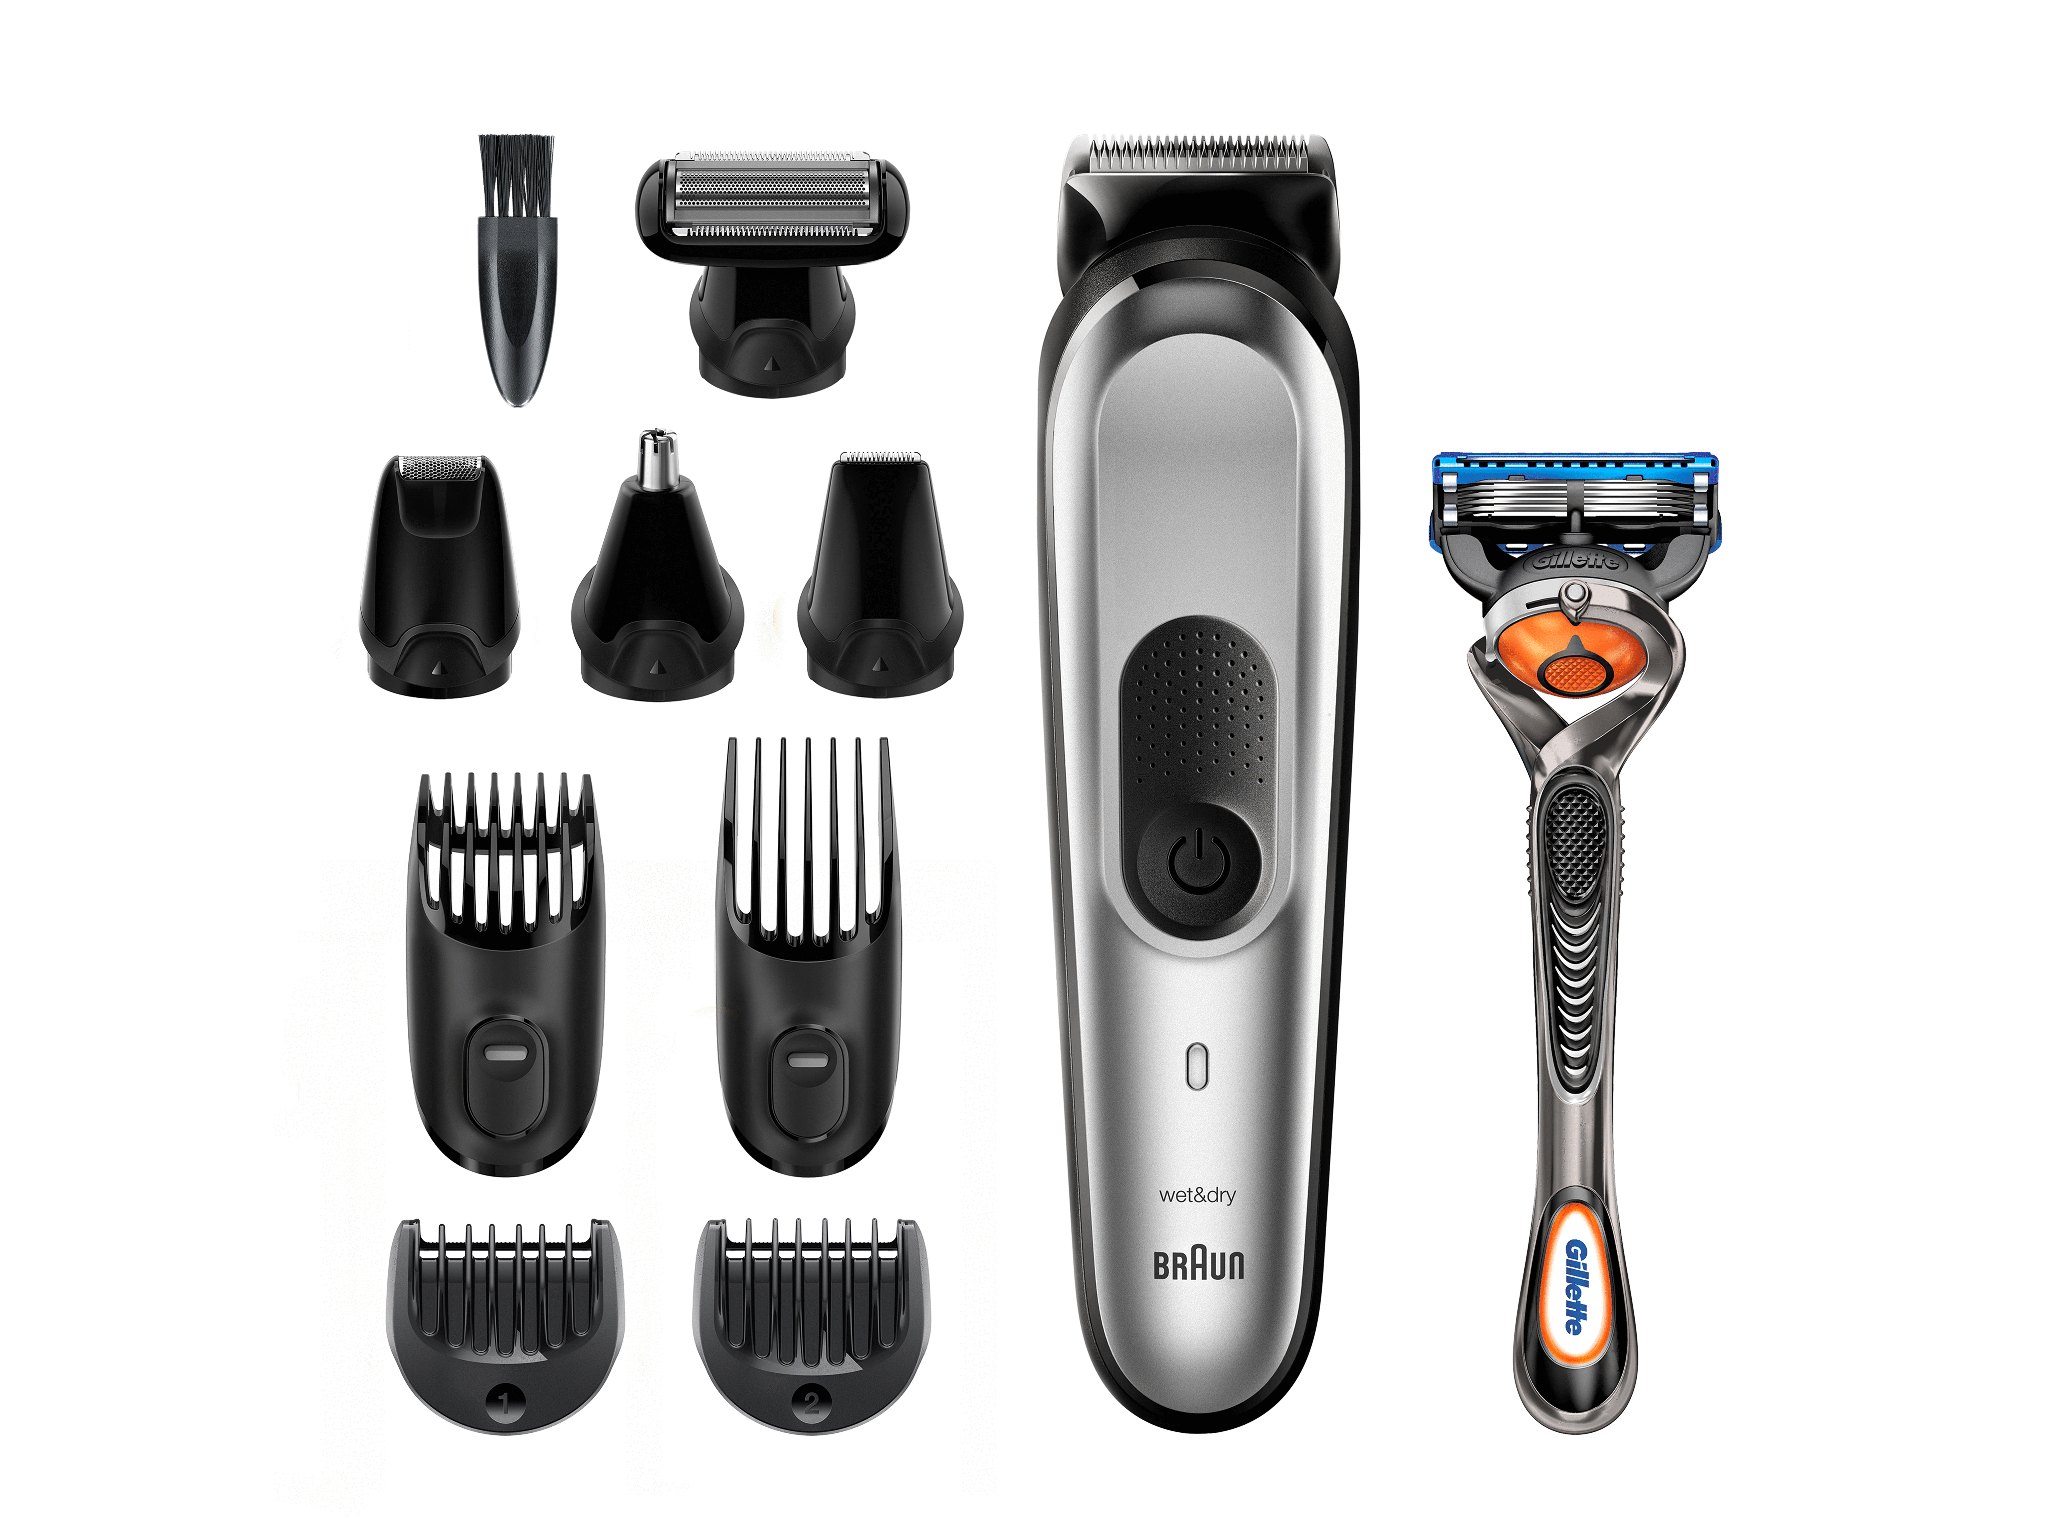 all-in-one trimmer 7 MGK 7220